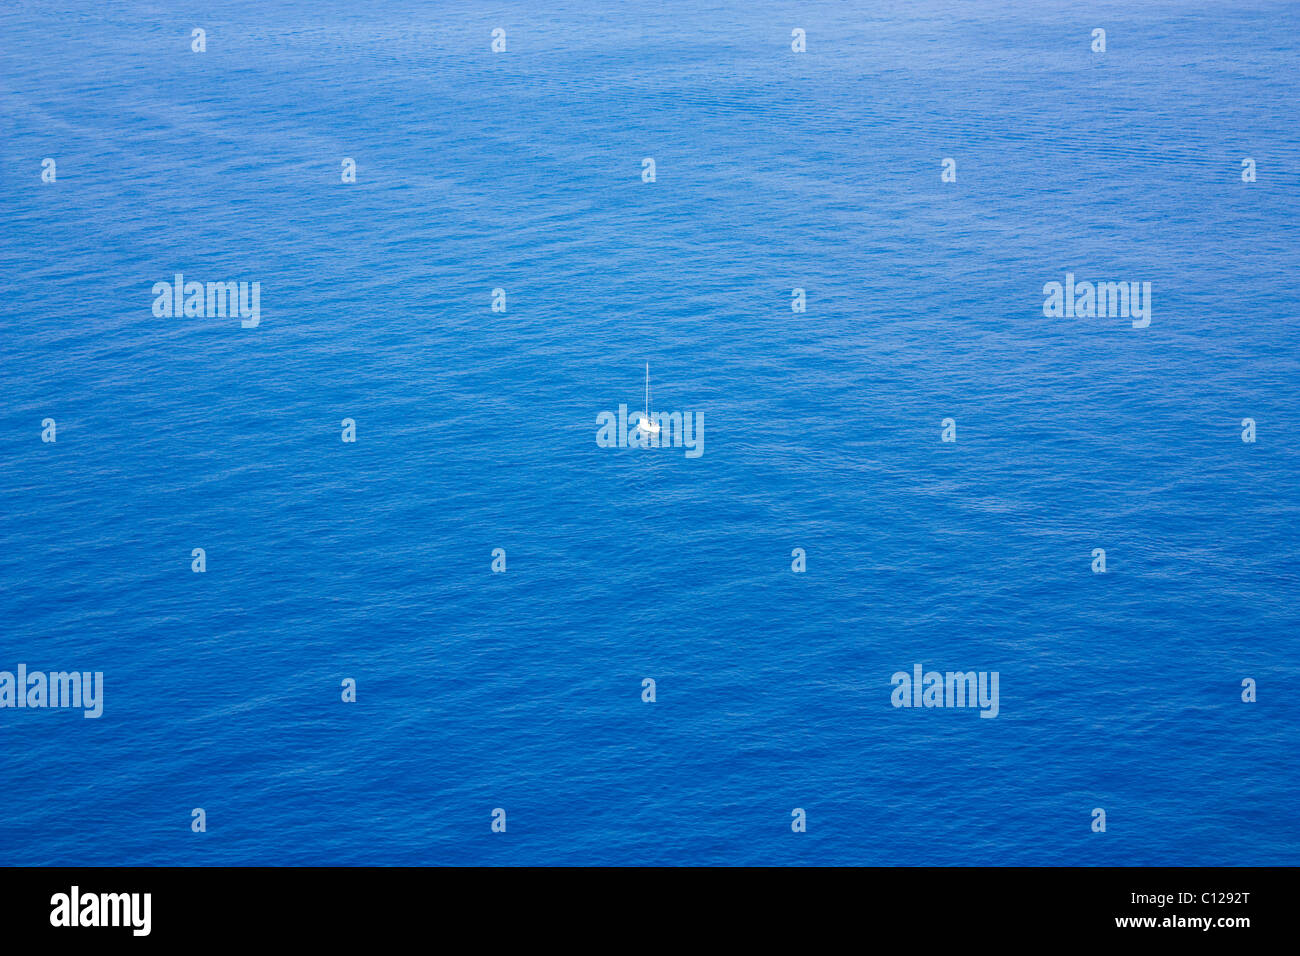 Photo of Single boat sailing in a vast ocean Stock Photo